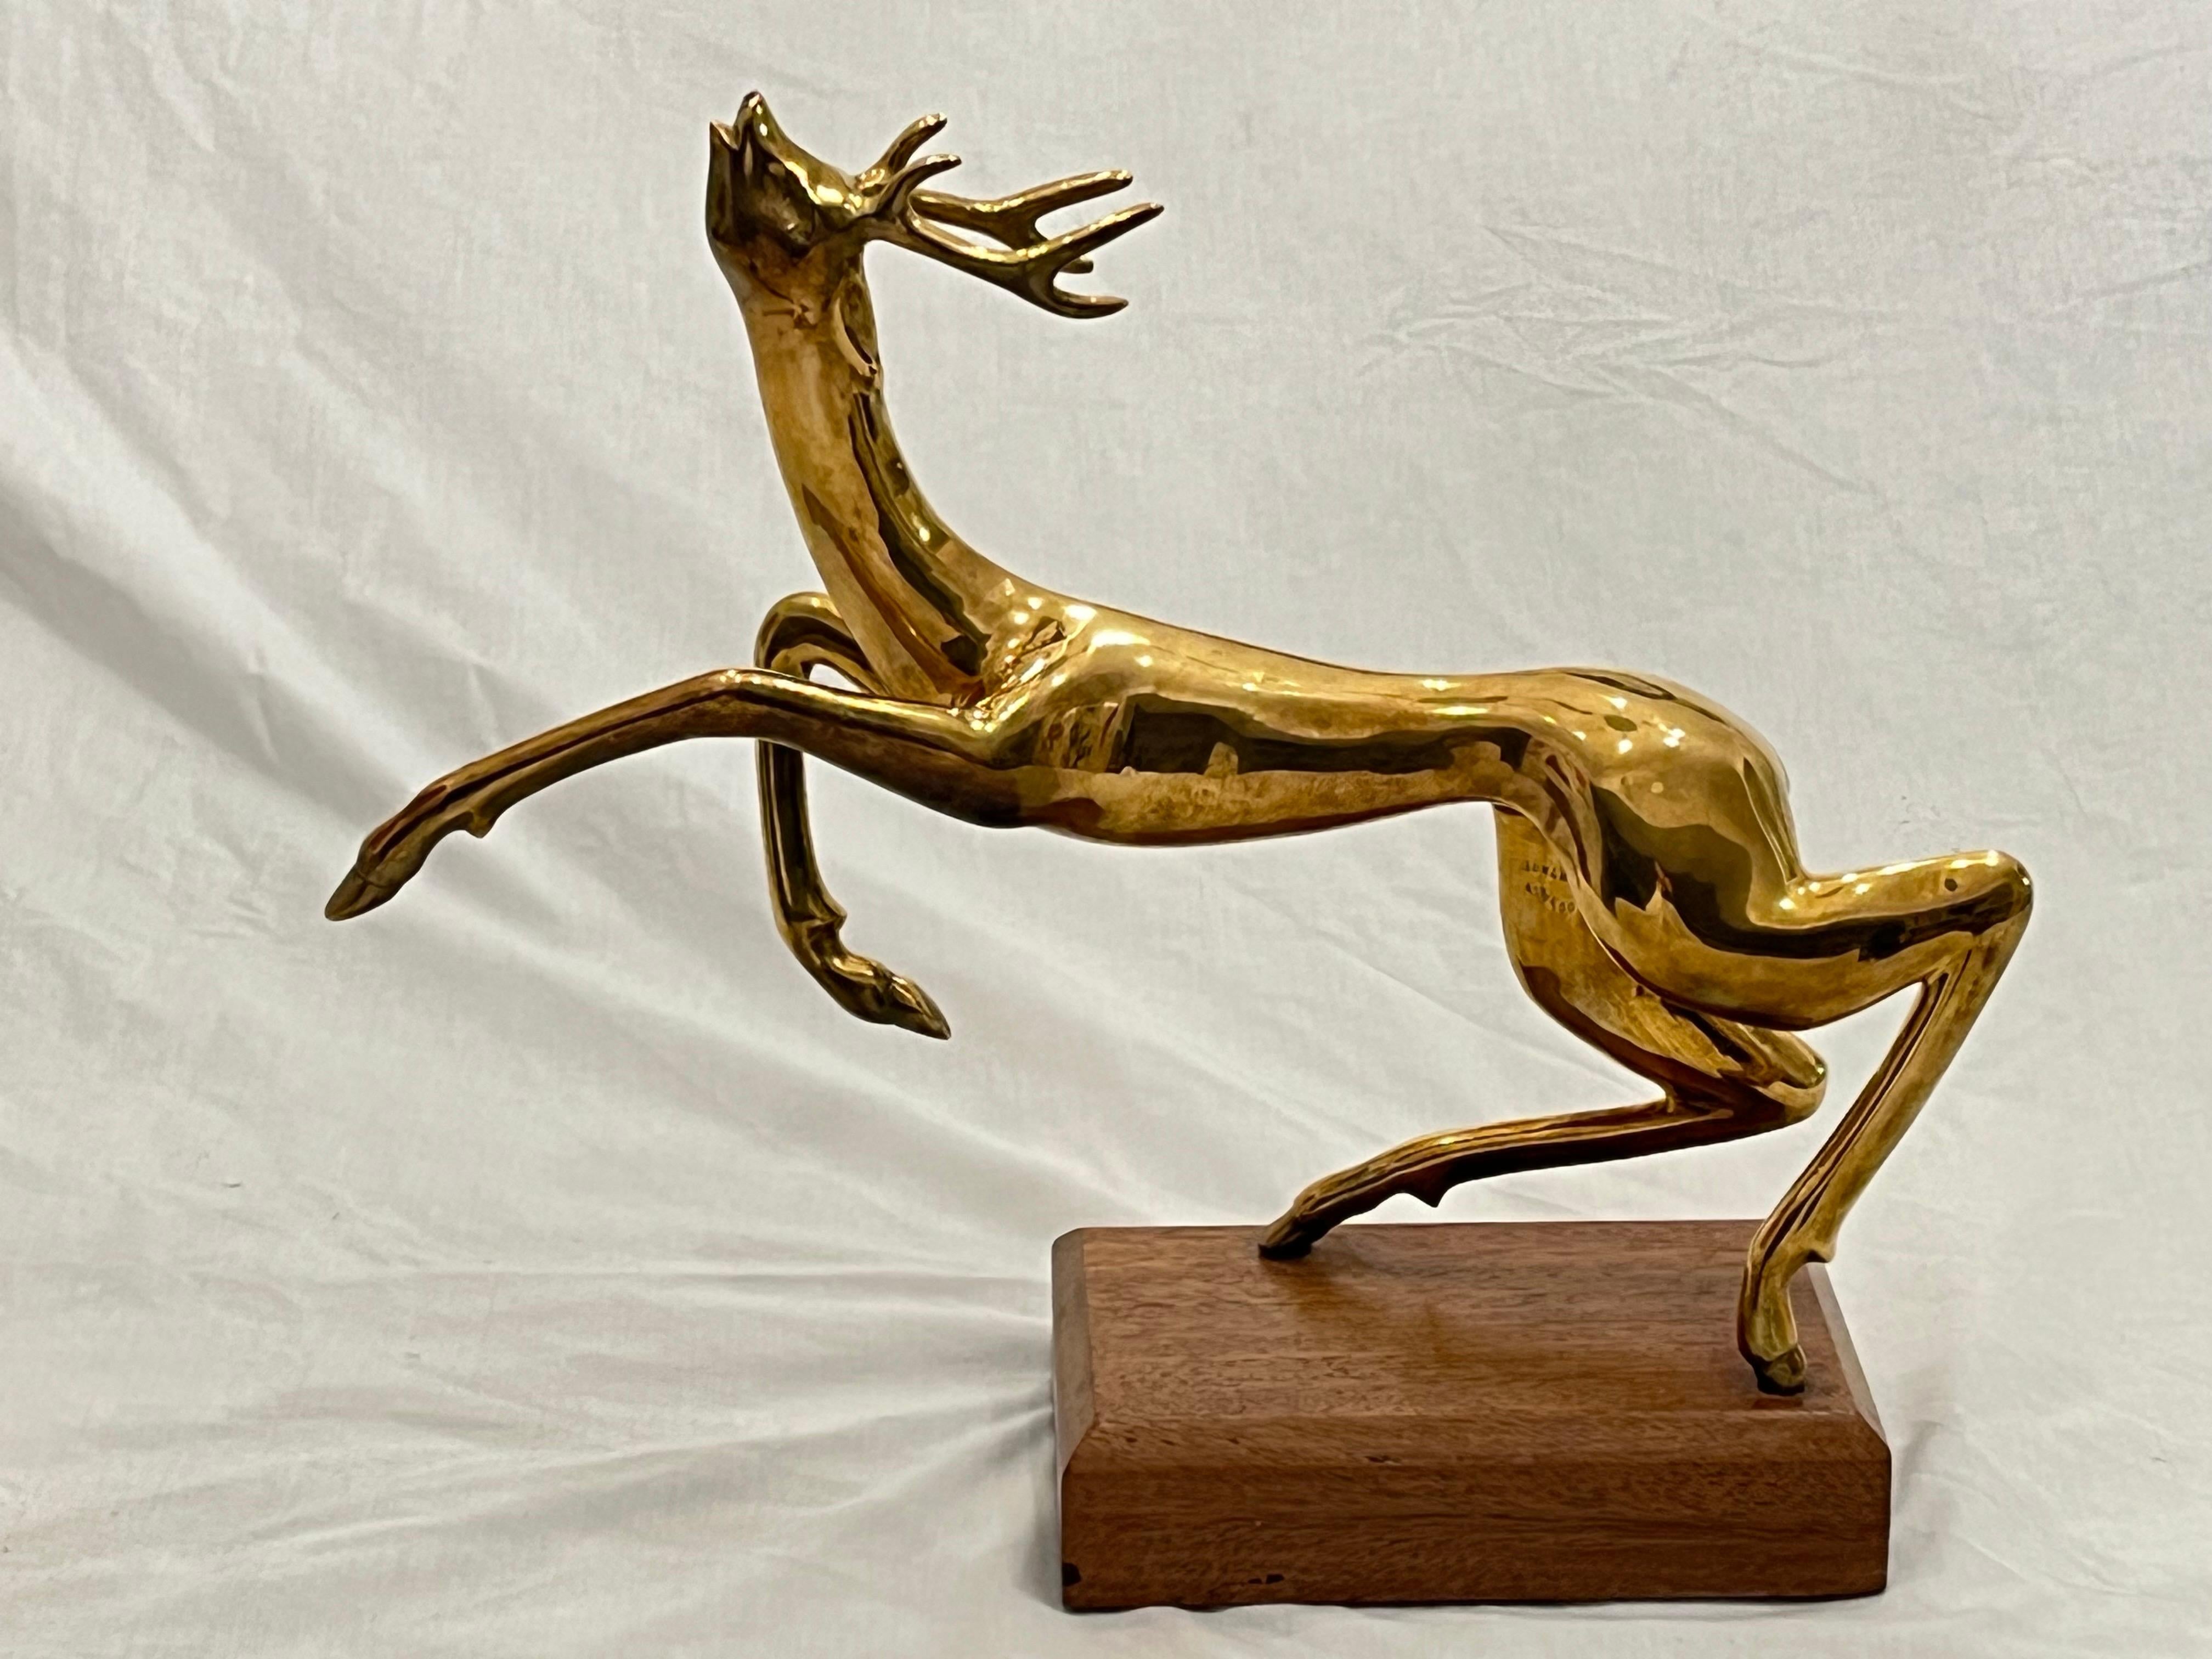 Vintage Thai Somchai Hattakitkosol Signed Solid Bronze Sculpture of Leaping Deer For Sale 6